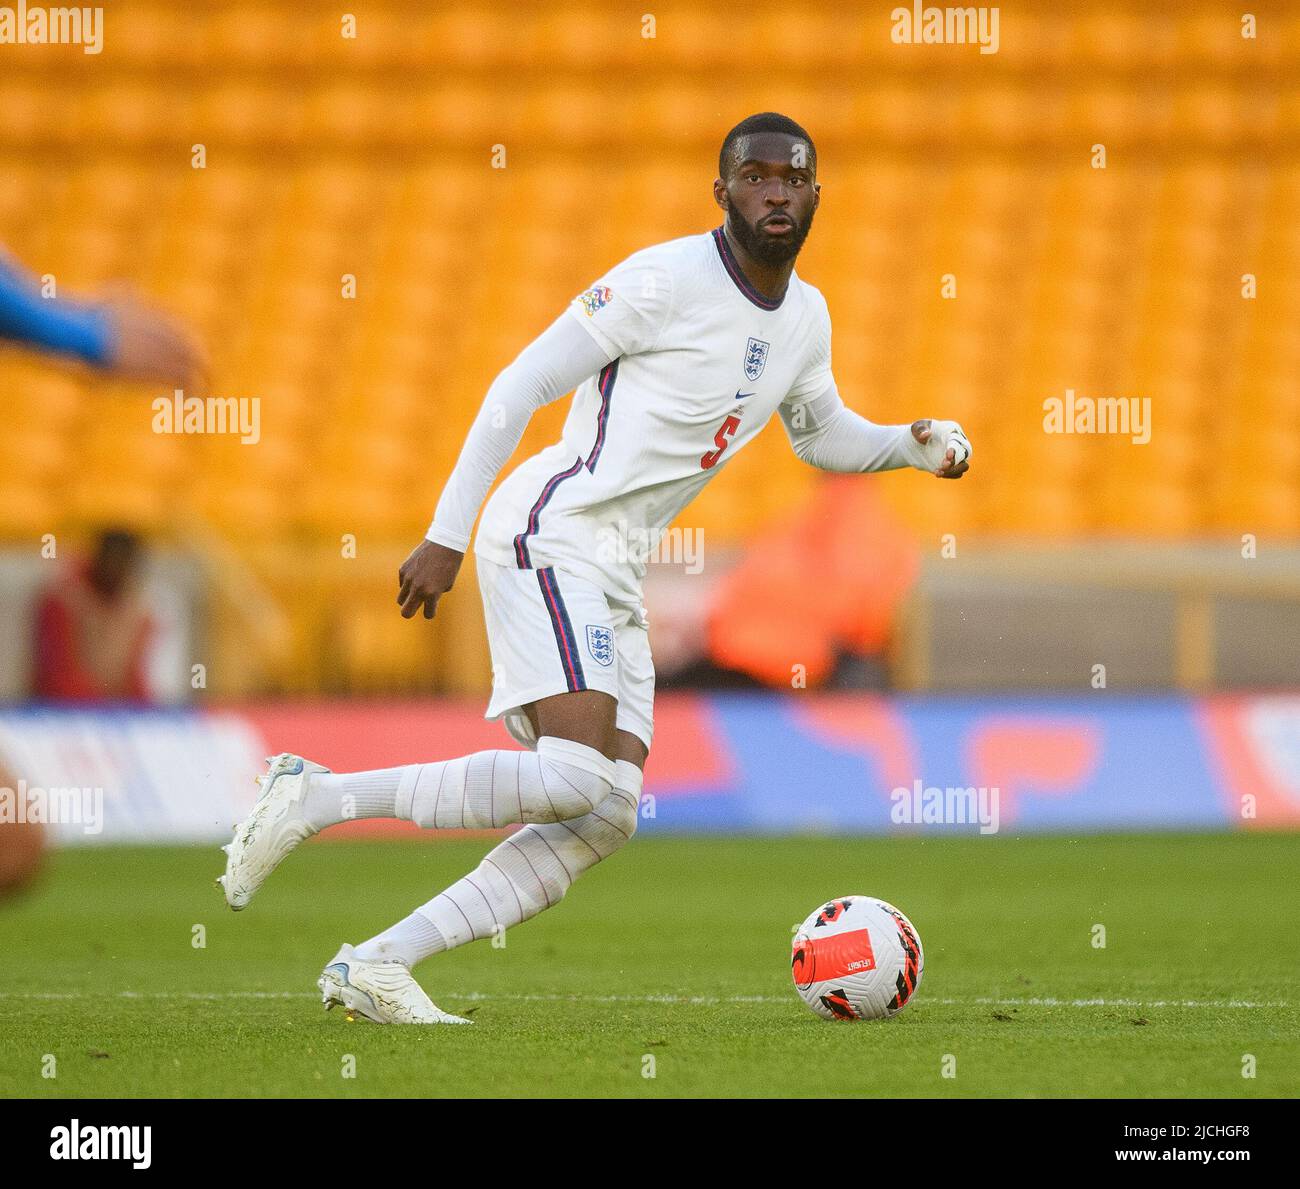 11 Jun 2022 - England v Italy - UEFA Nations League - Group 3 - Molineux Stadium  England's Fikayo Tomori during the match against Italy. Picture Credit : © Mark Pain / Alamy Live News Stock Photo